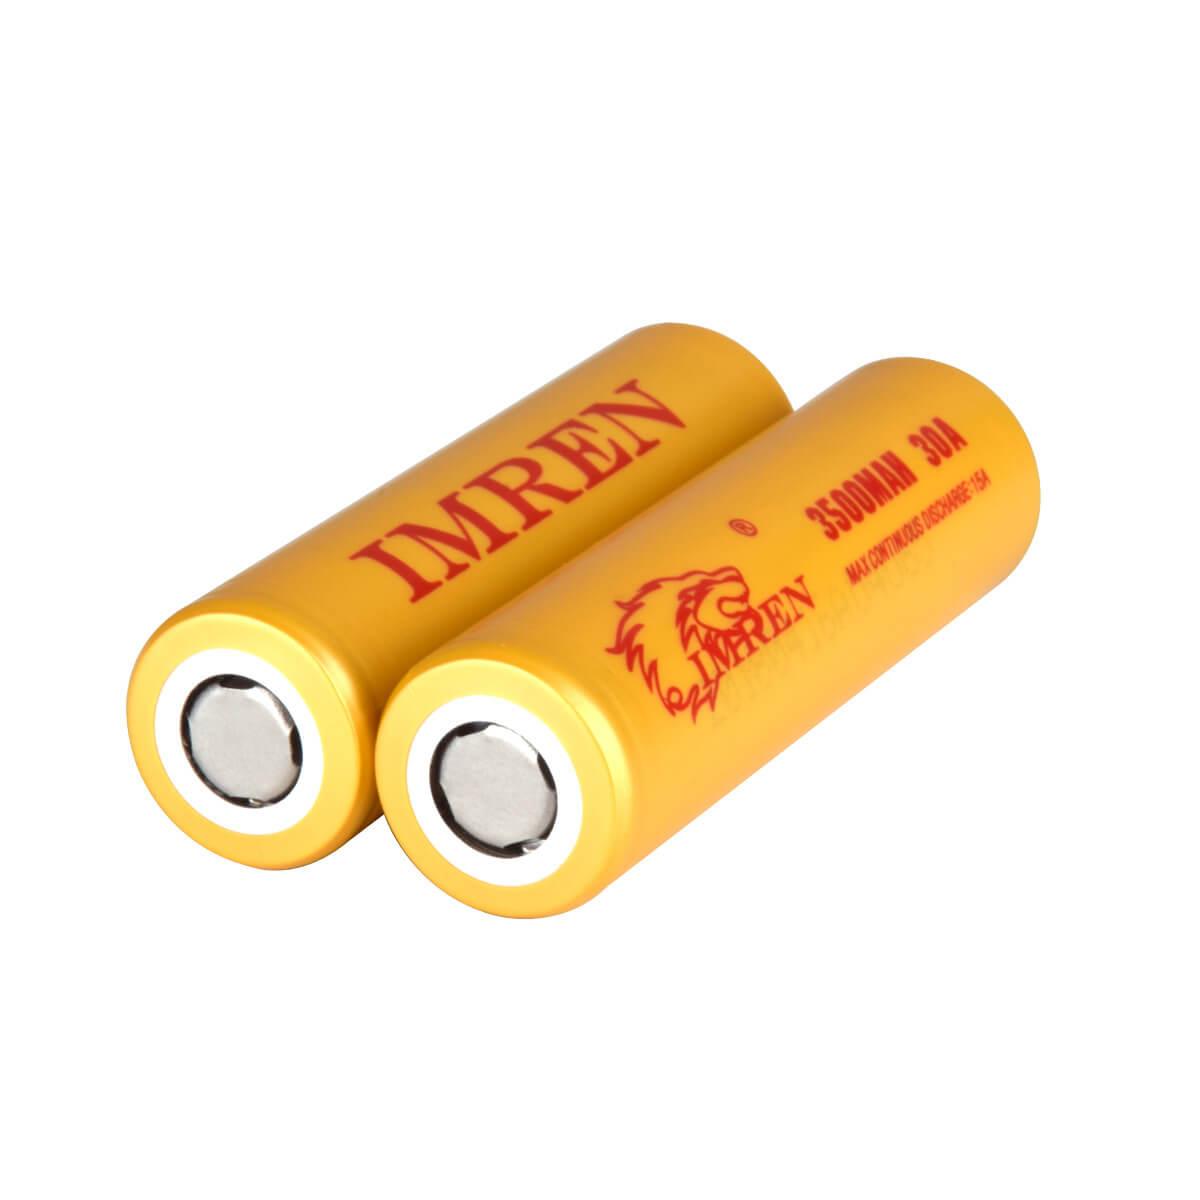 Battery Choice - Lithium-ion The IMREN Store Best of Rechargeable Battery Official